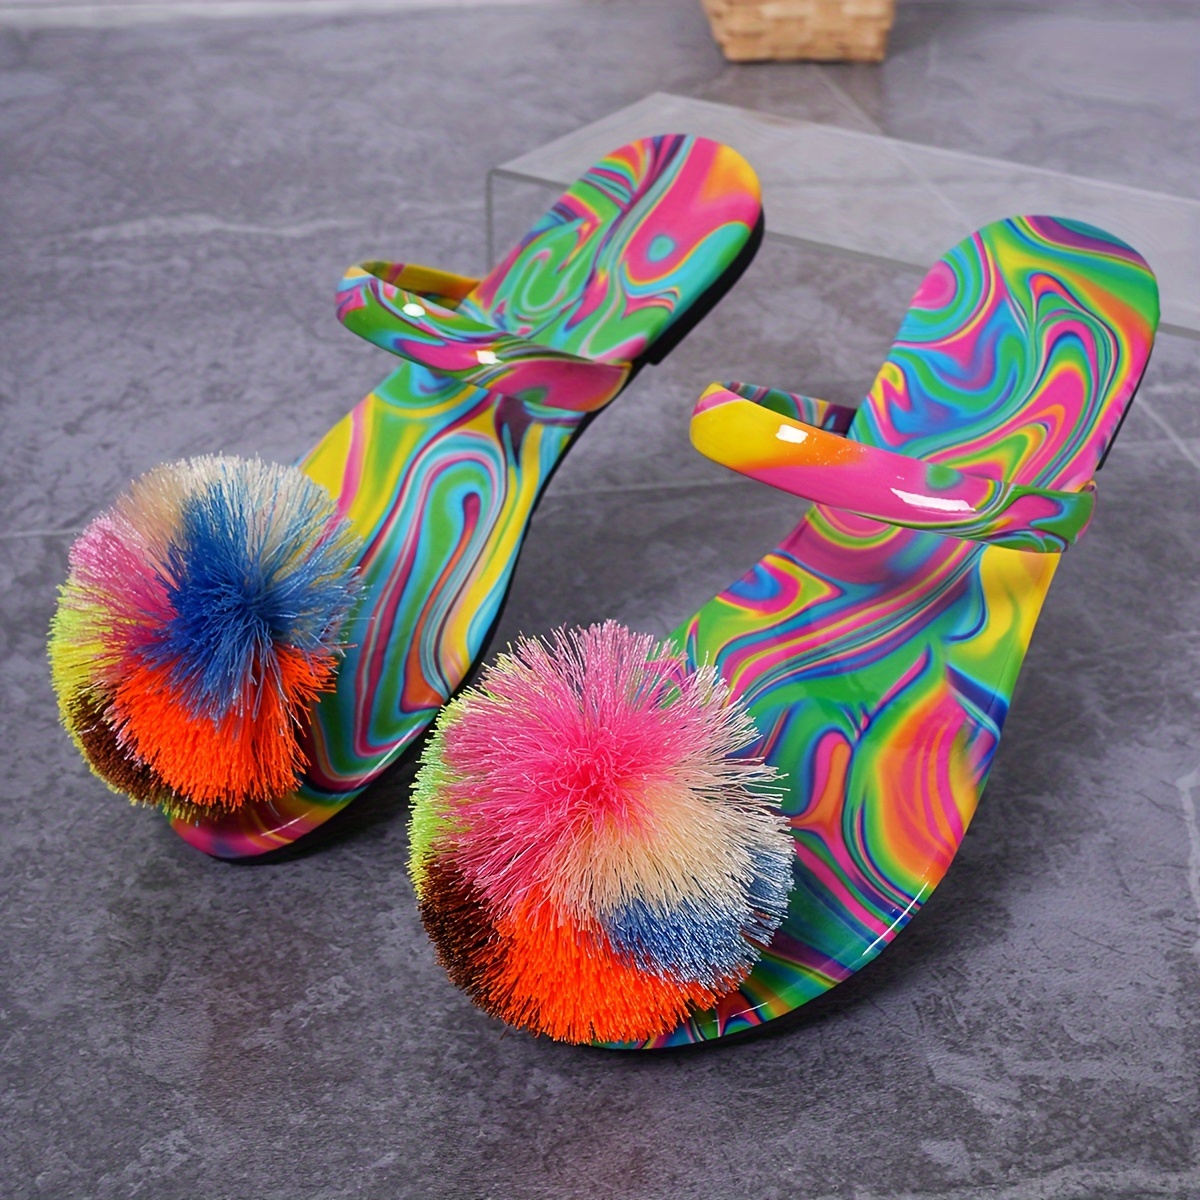 

Women's Colorful Stylish Slides, Rainbow Stripe Flat Sandals, Casual Summer Beach Slides With Soft Sole